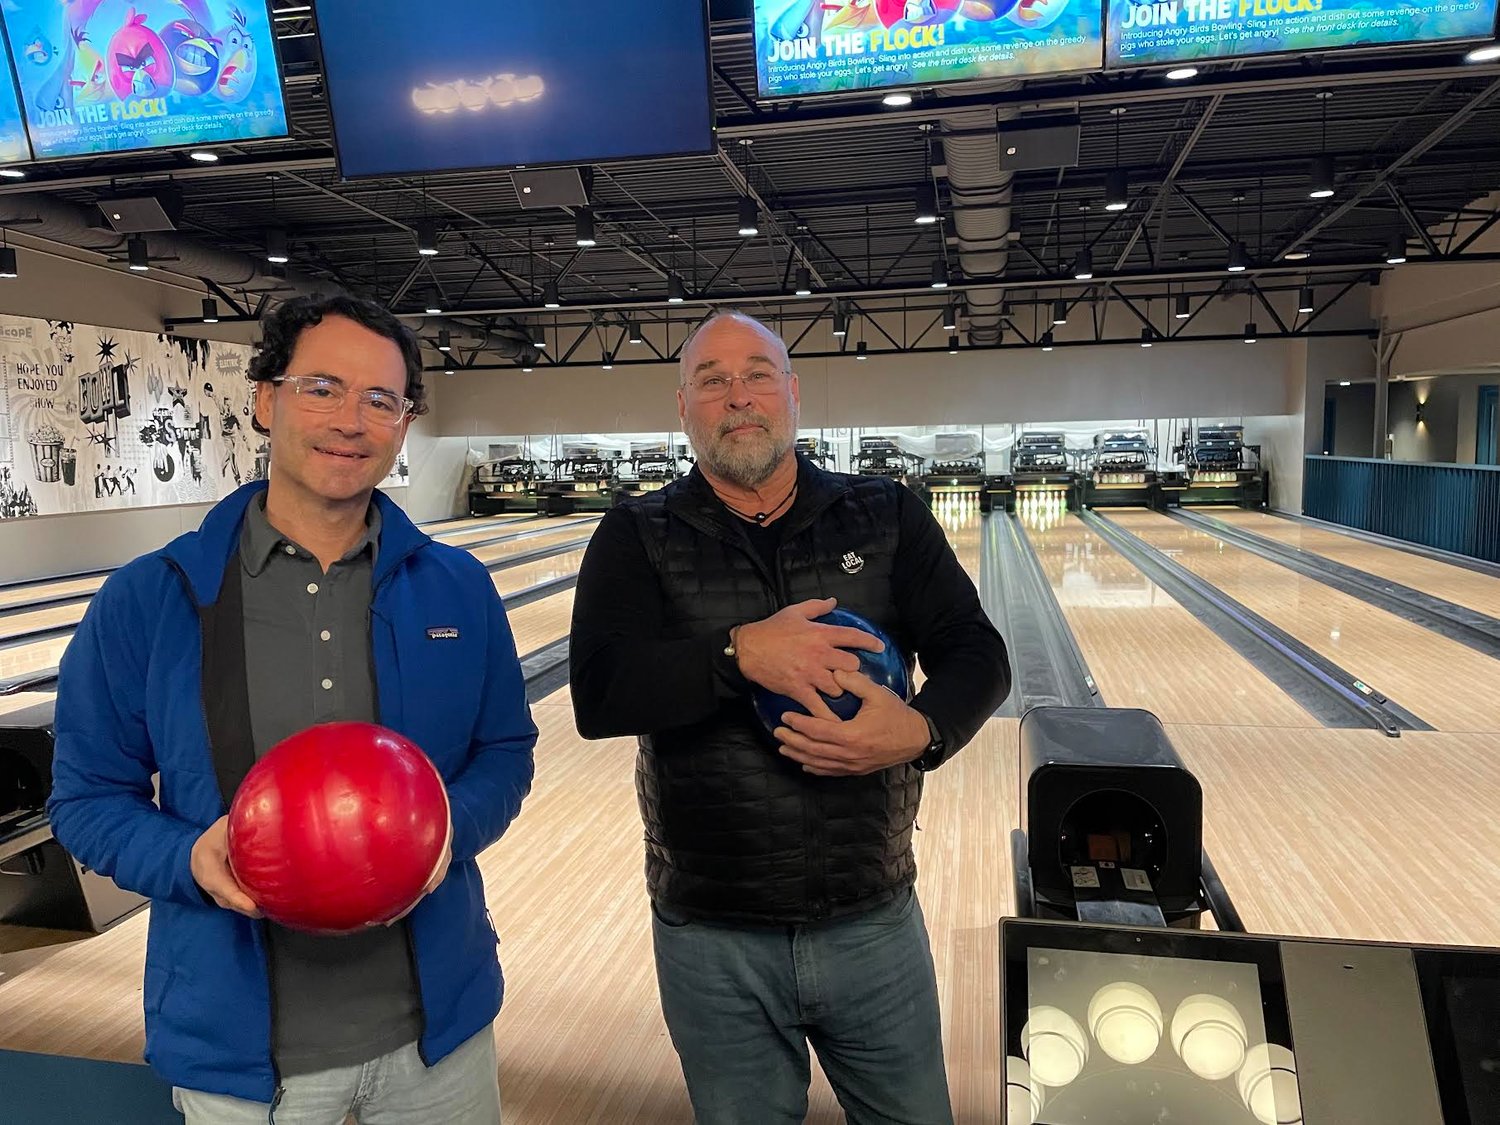 Developers David Pharr and Robert St. John get ready for a round at the new Highball Lanes in Fondren.